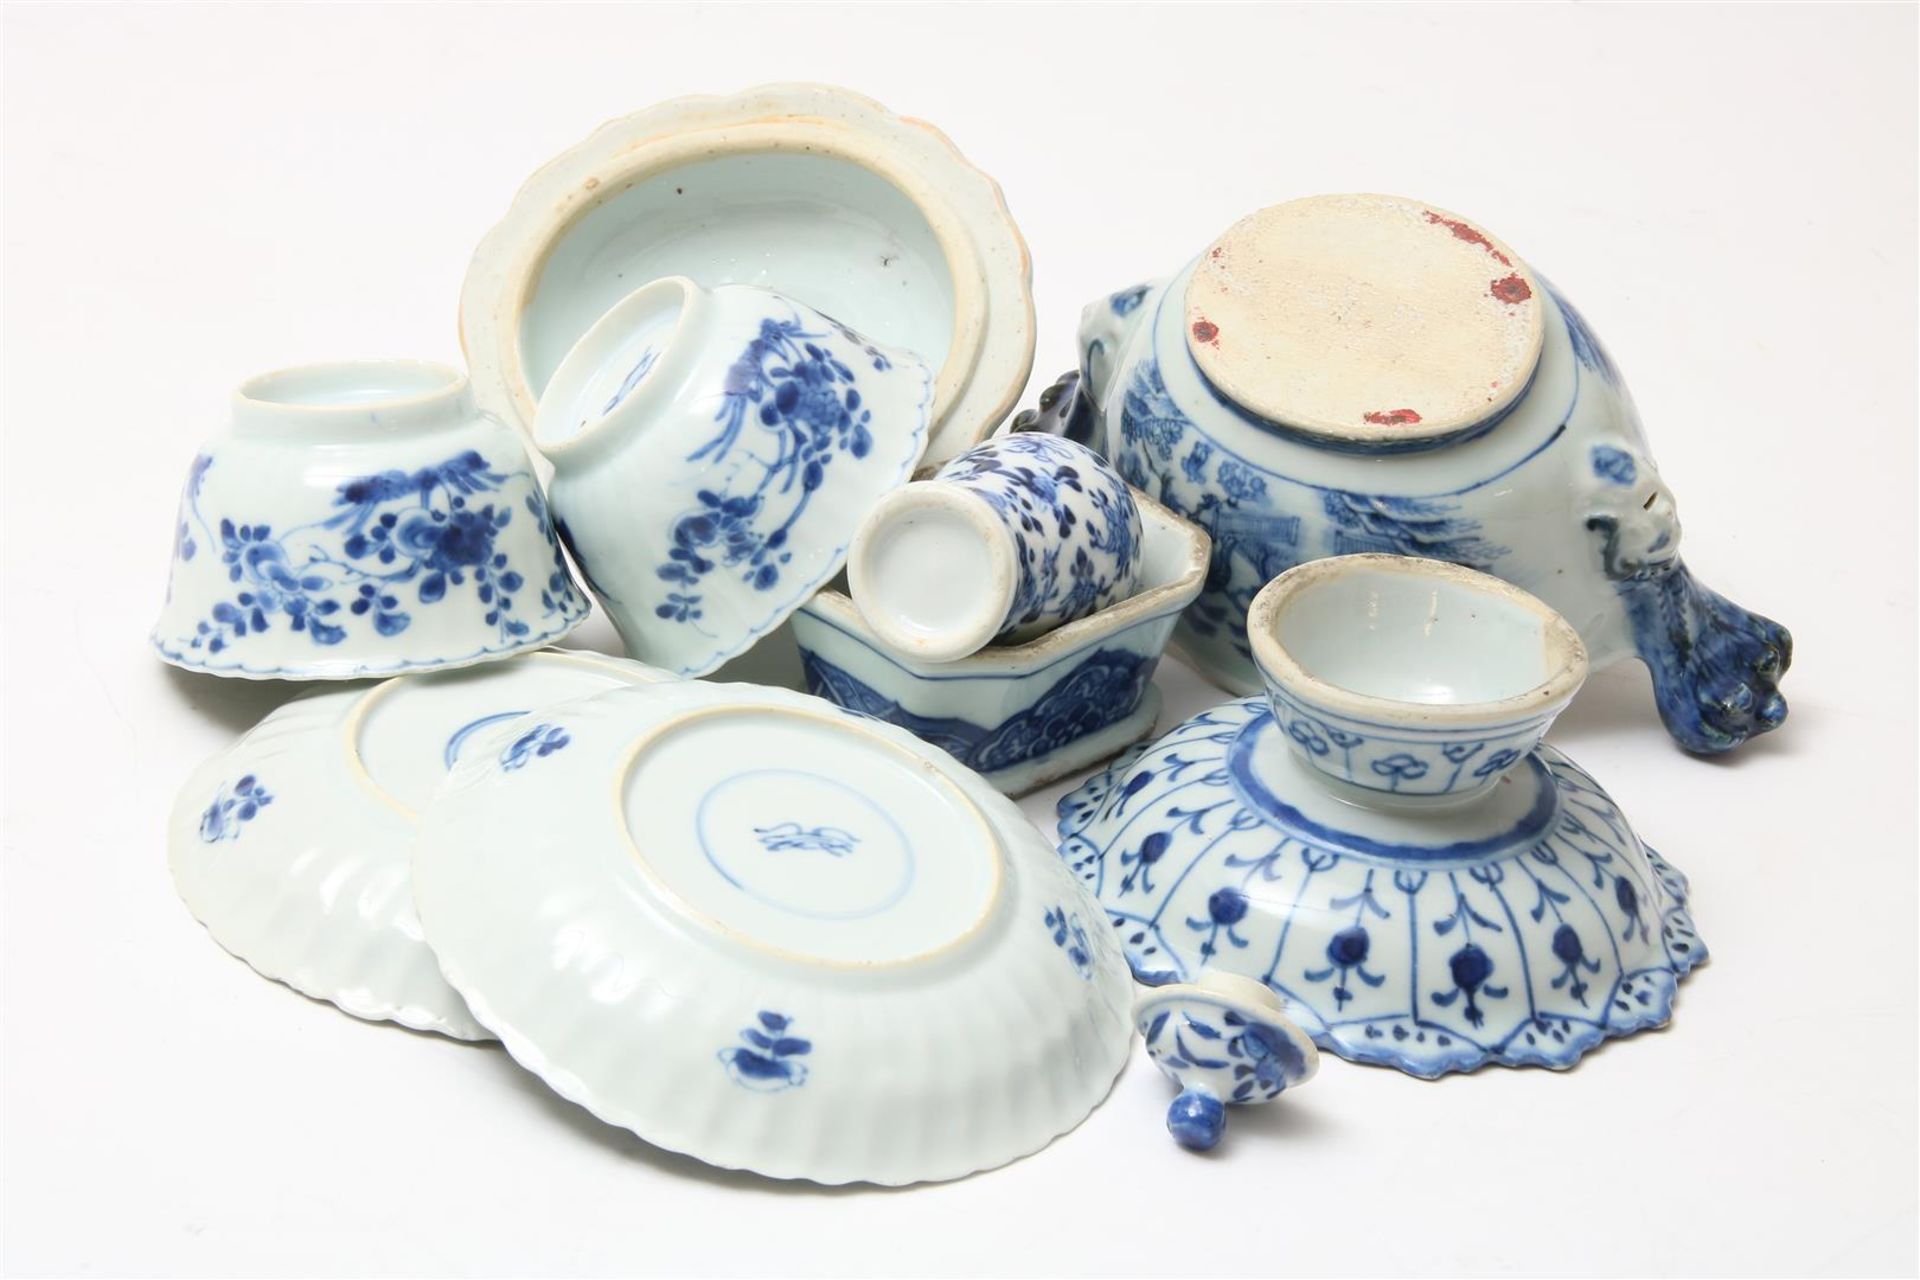 Lot of a pair of Kangxi cups and saucers with decoration of flowering shrubs, (1x saucer with - Image 5 of 6